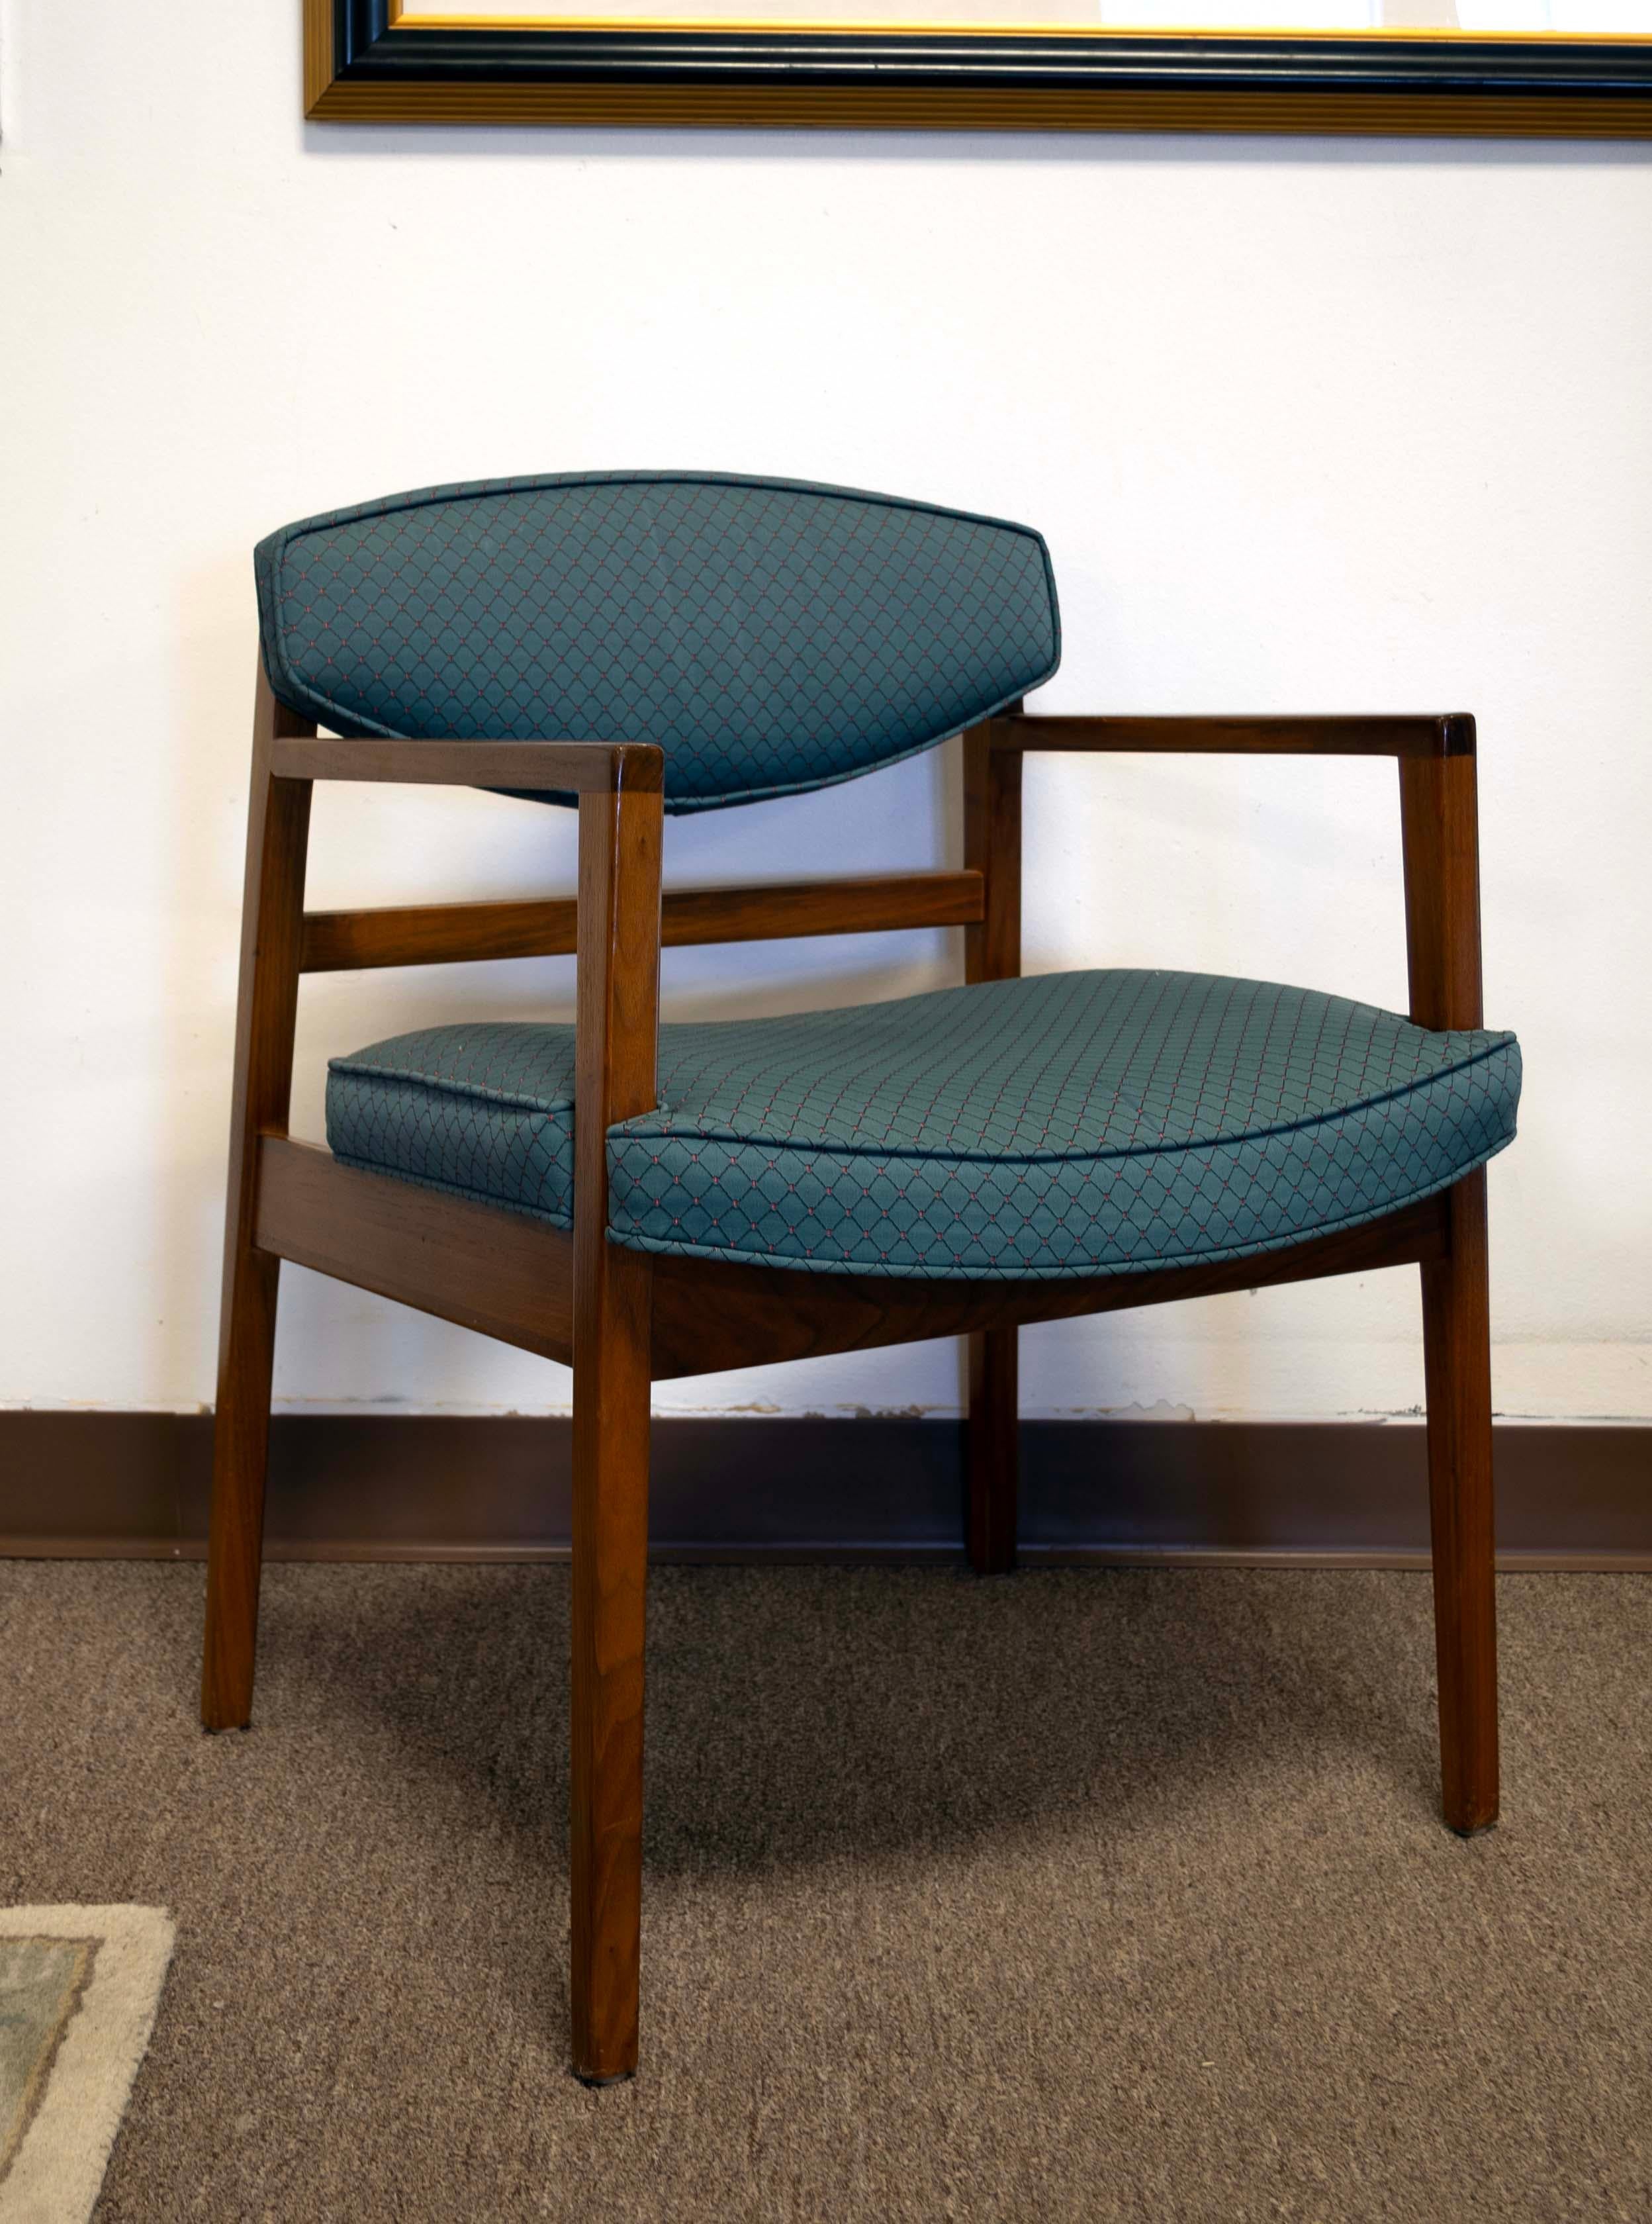 Elegant and sophisticated, this set of six George Nelson for Herman Miller chairs features two captain and four side chairs, all epitomizing classic Mid-Century Modern design. The warm walnut frames are beautifully complemented by the textured teal